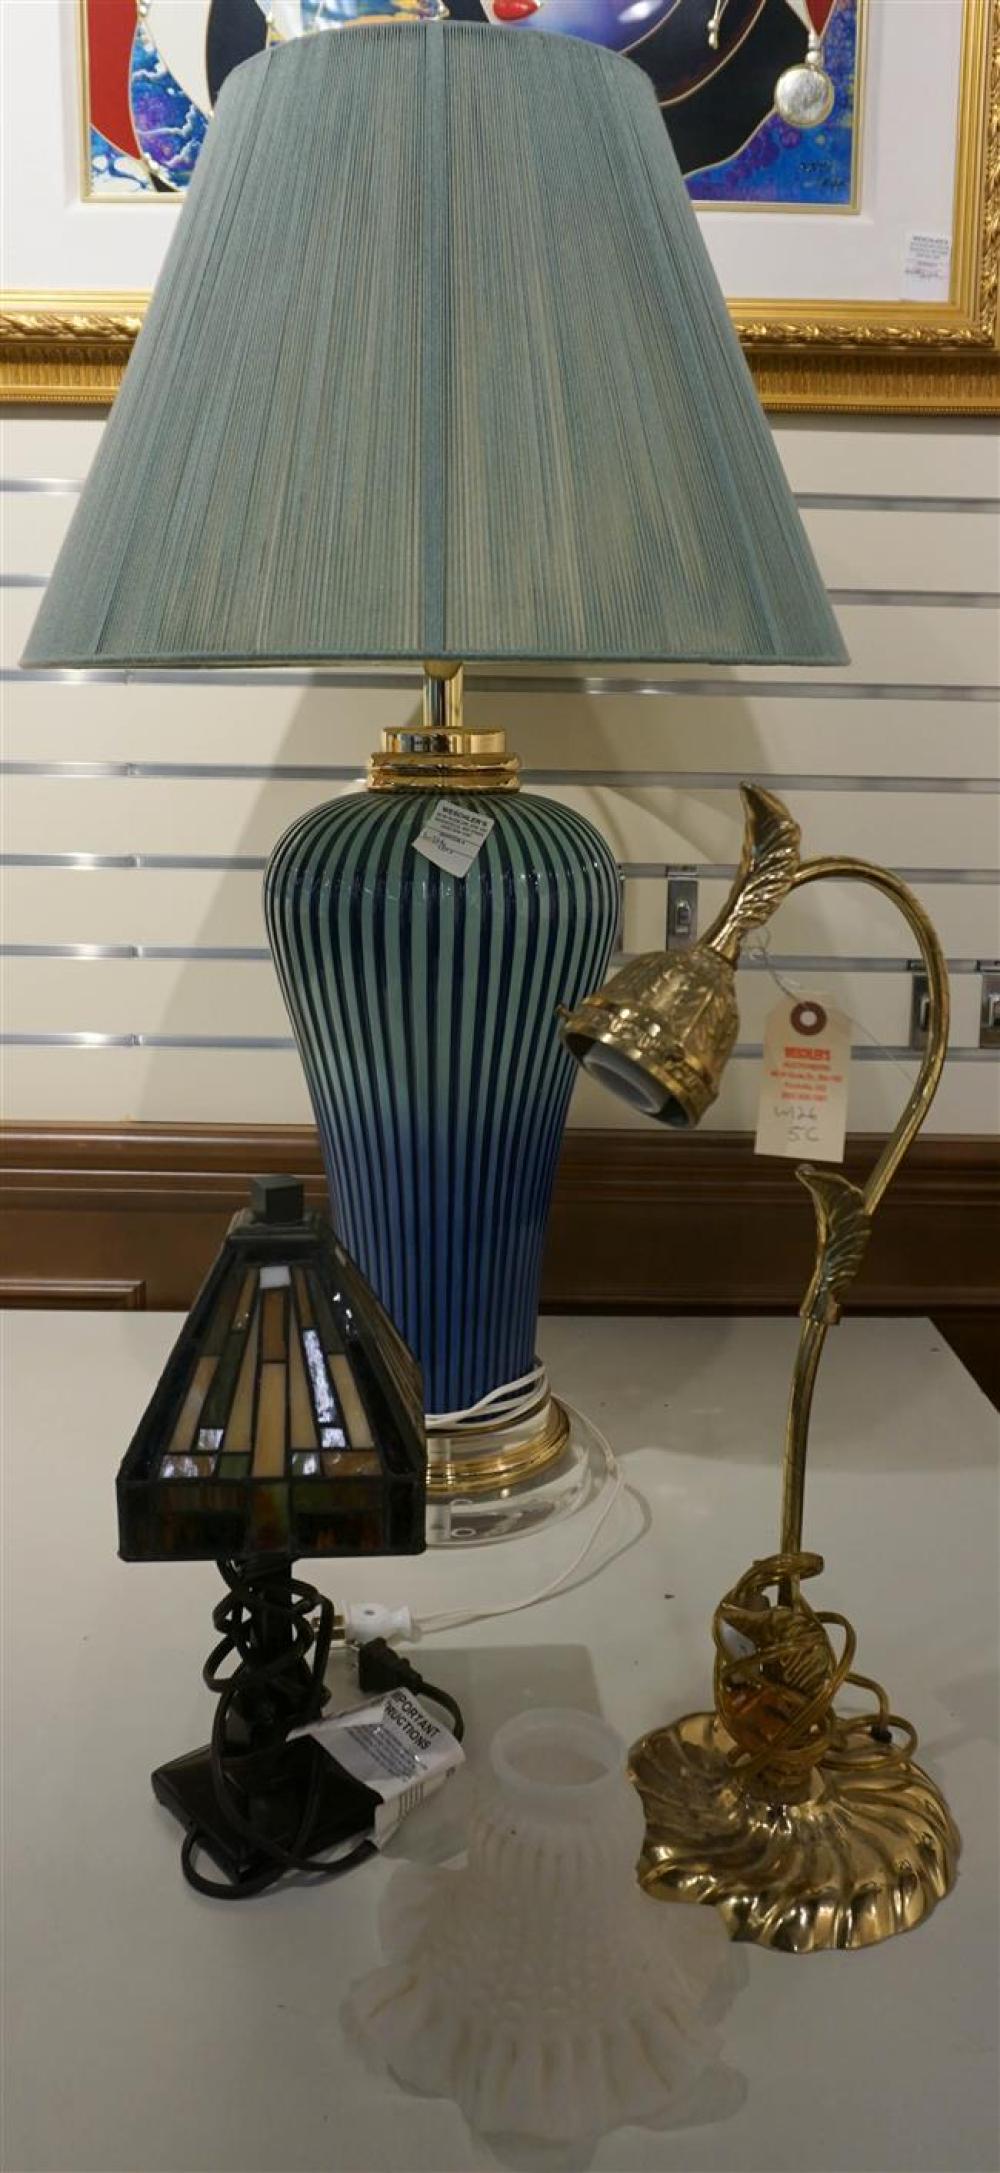 ART GLASS TABLE LAMP LEADED GLASS 32423a